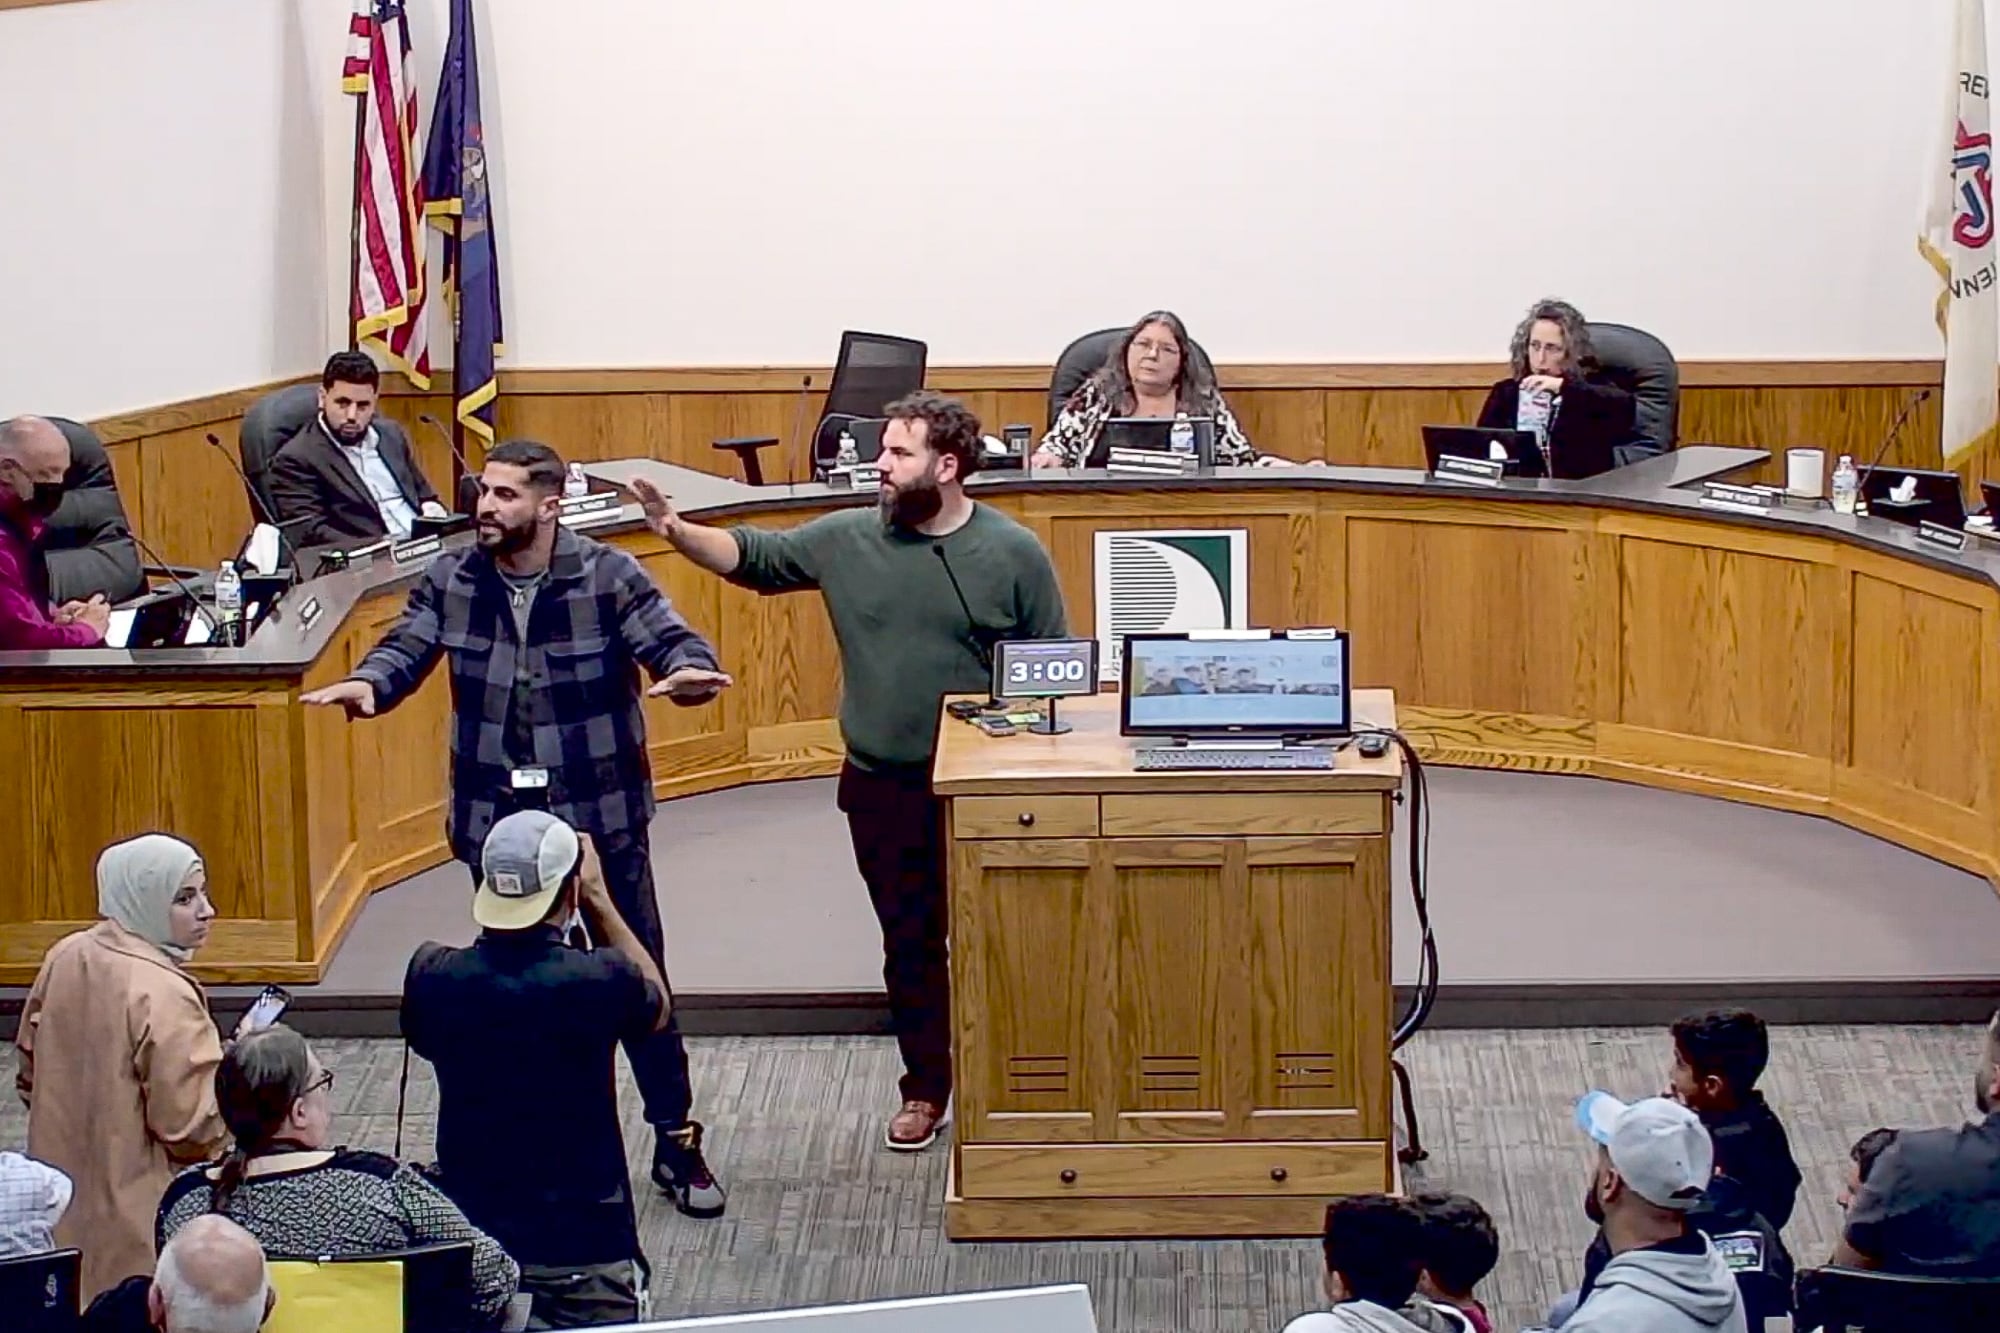 two men stand with arms up trying to calm a crowd in an administrative building as board members sit behind a semicircle desk in the background